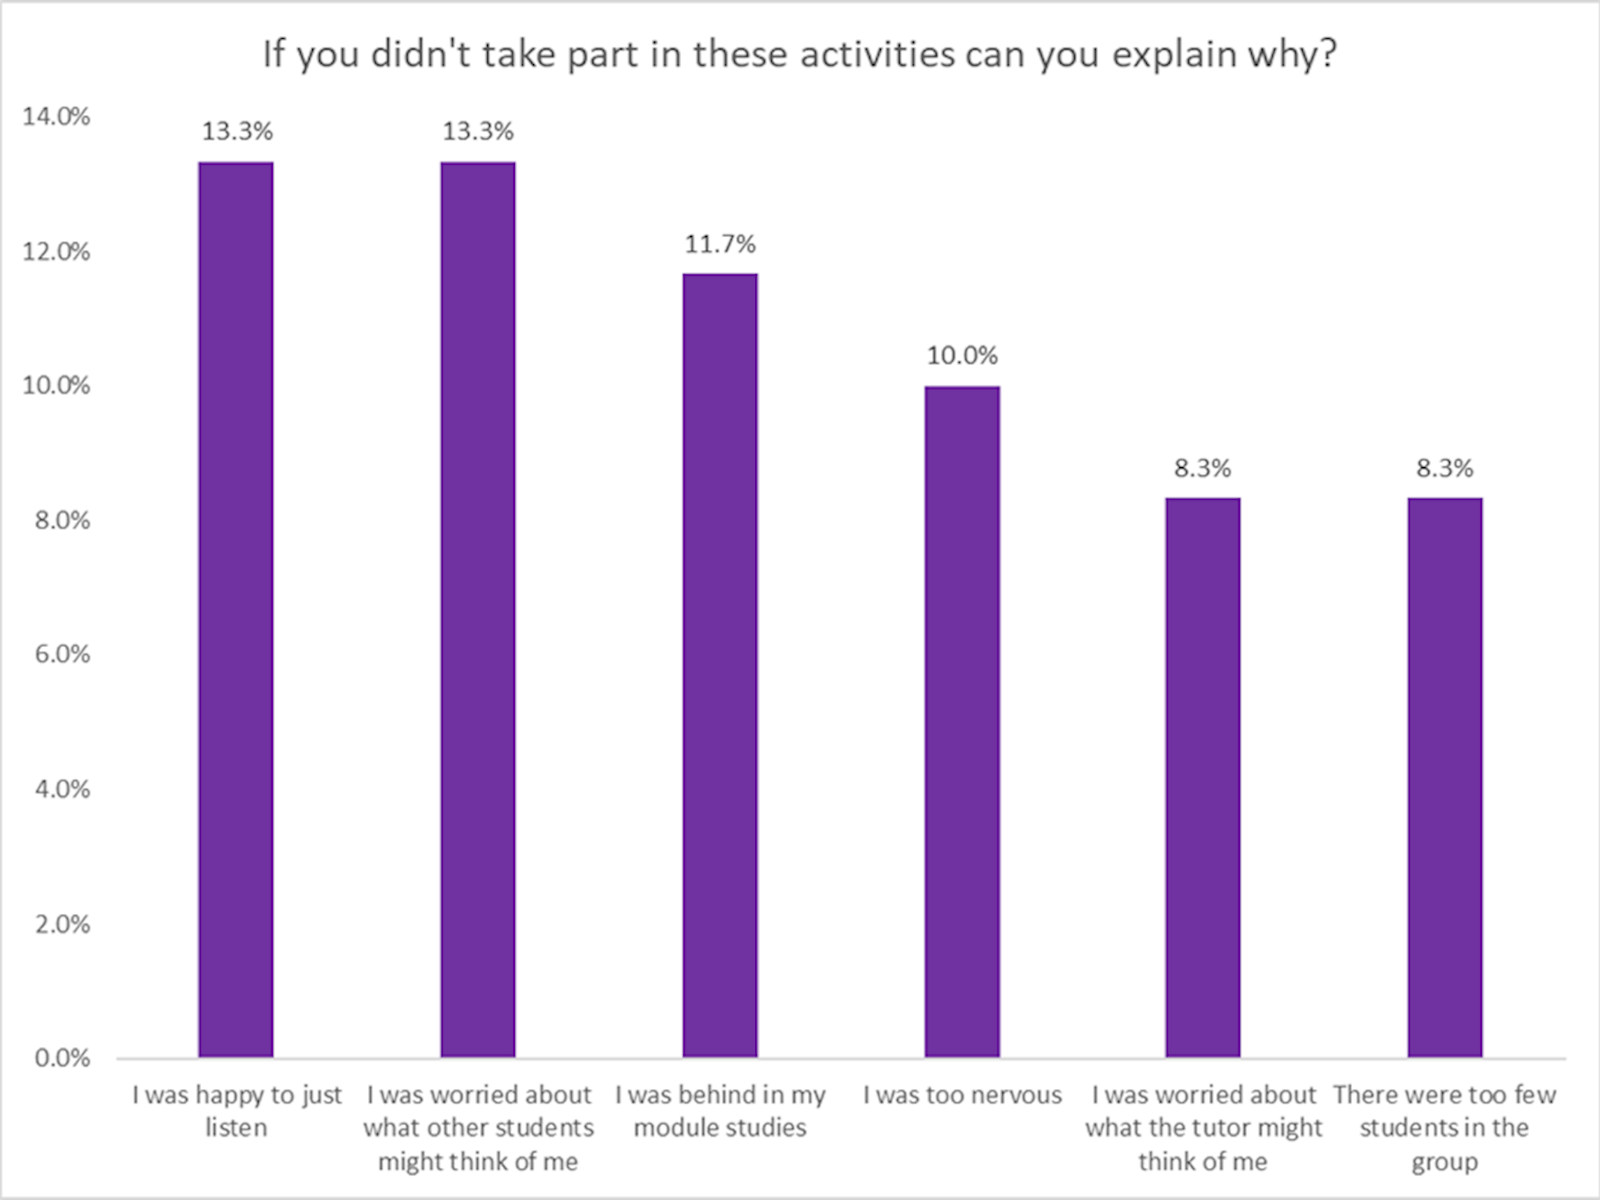 Graph showing why students did not take part in activities